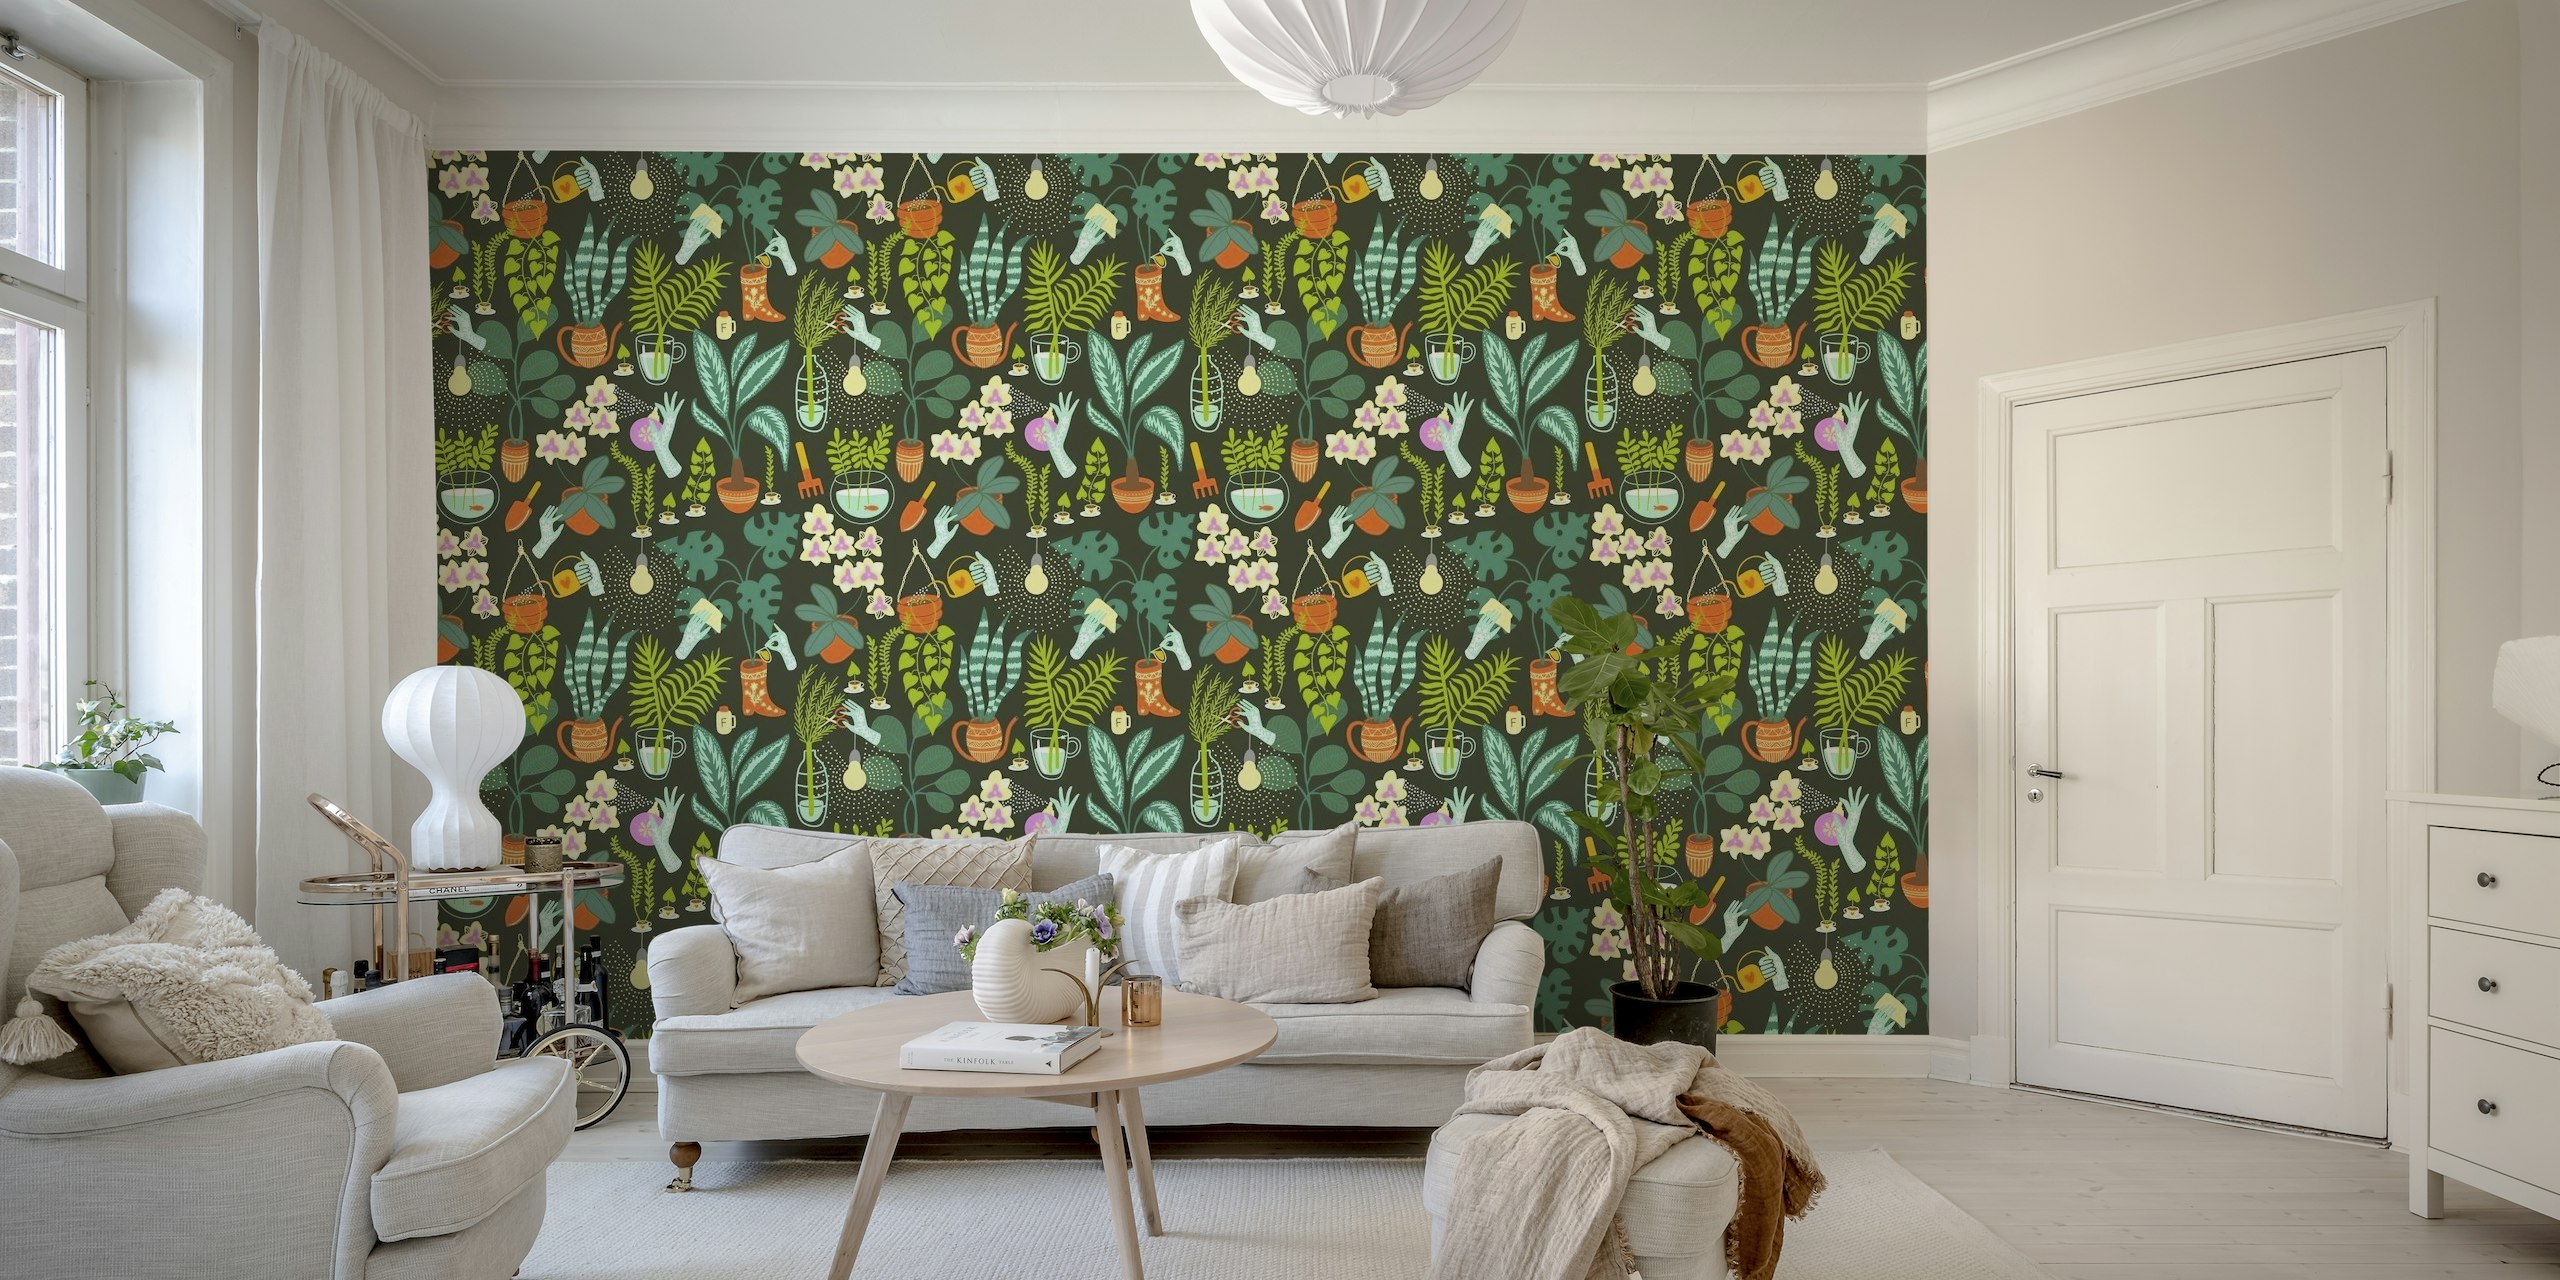 Botanical themed wall mural with various indoor plants and gardening elements